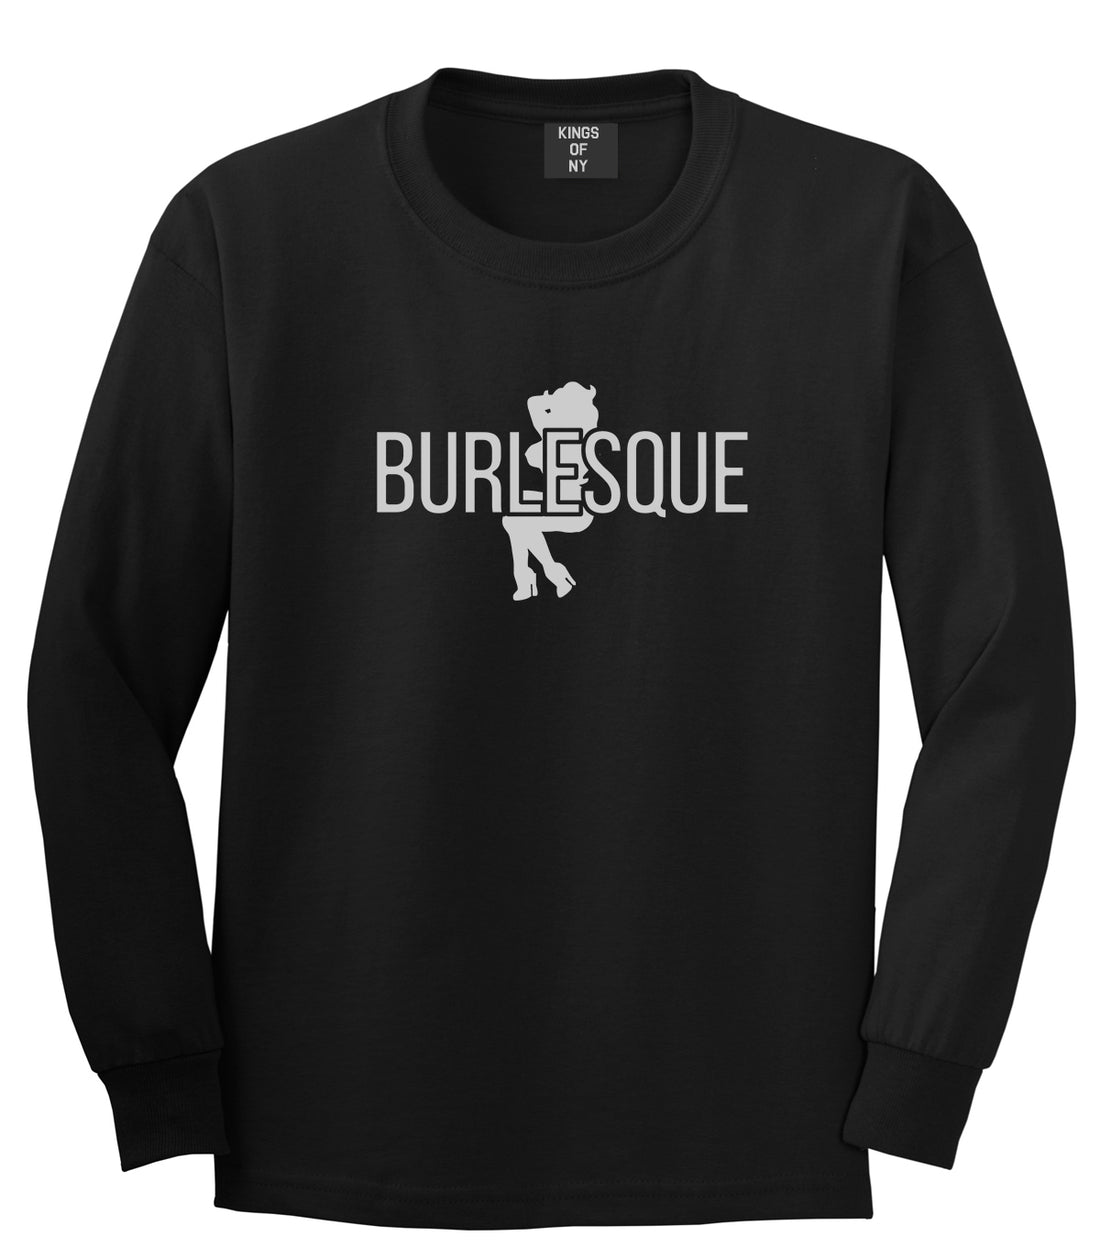 Burlesque Girl Black Long Sleeve T-Shirt by Kings Of NY